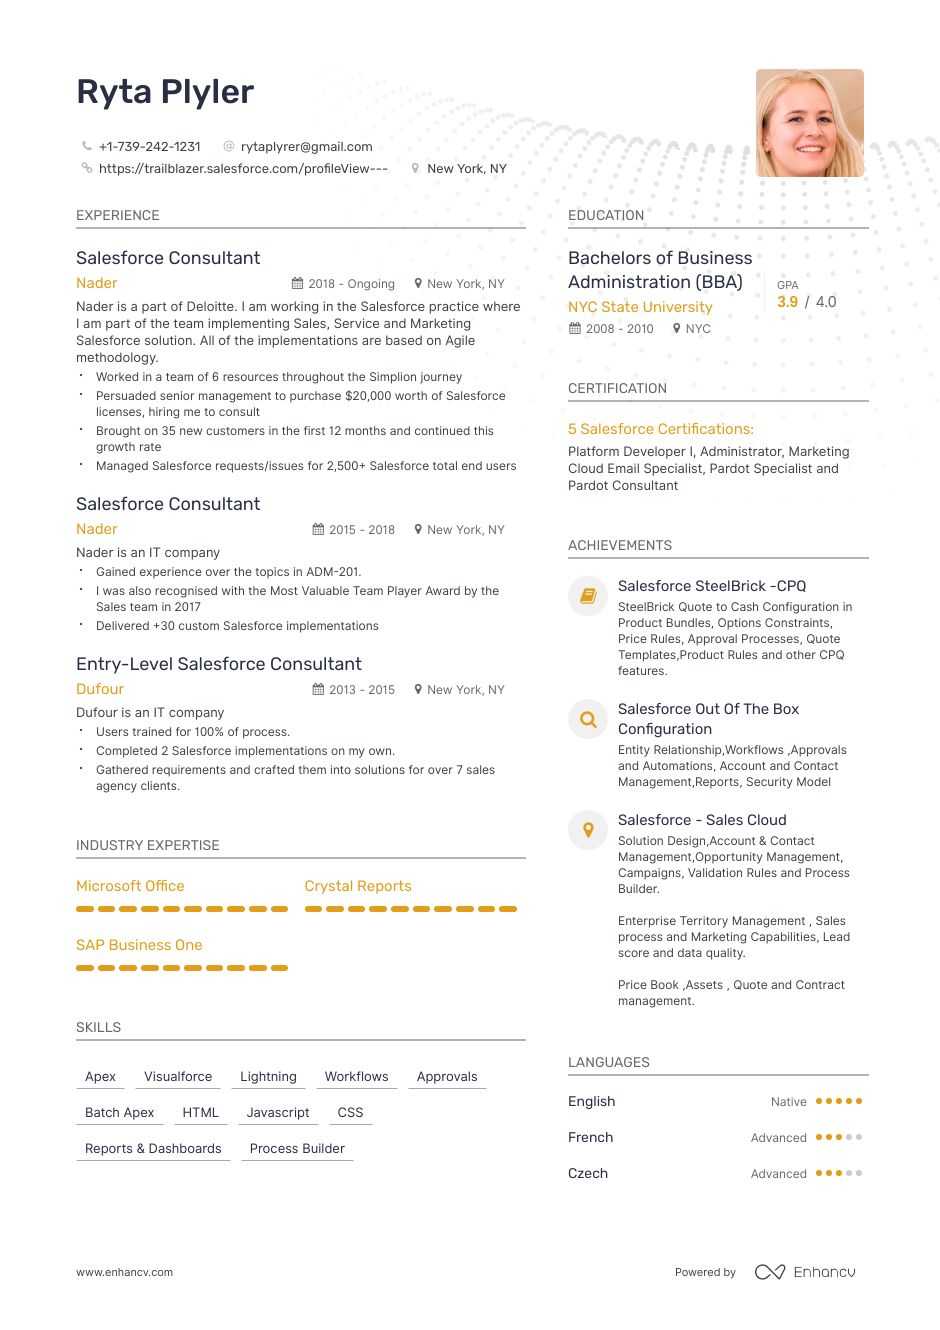 Salesforce Consultant Resume Samples and Writing Guide for ...